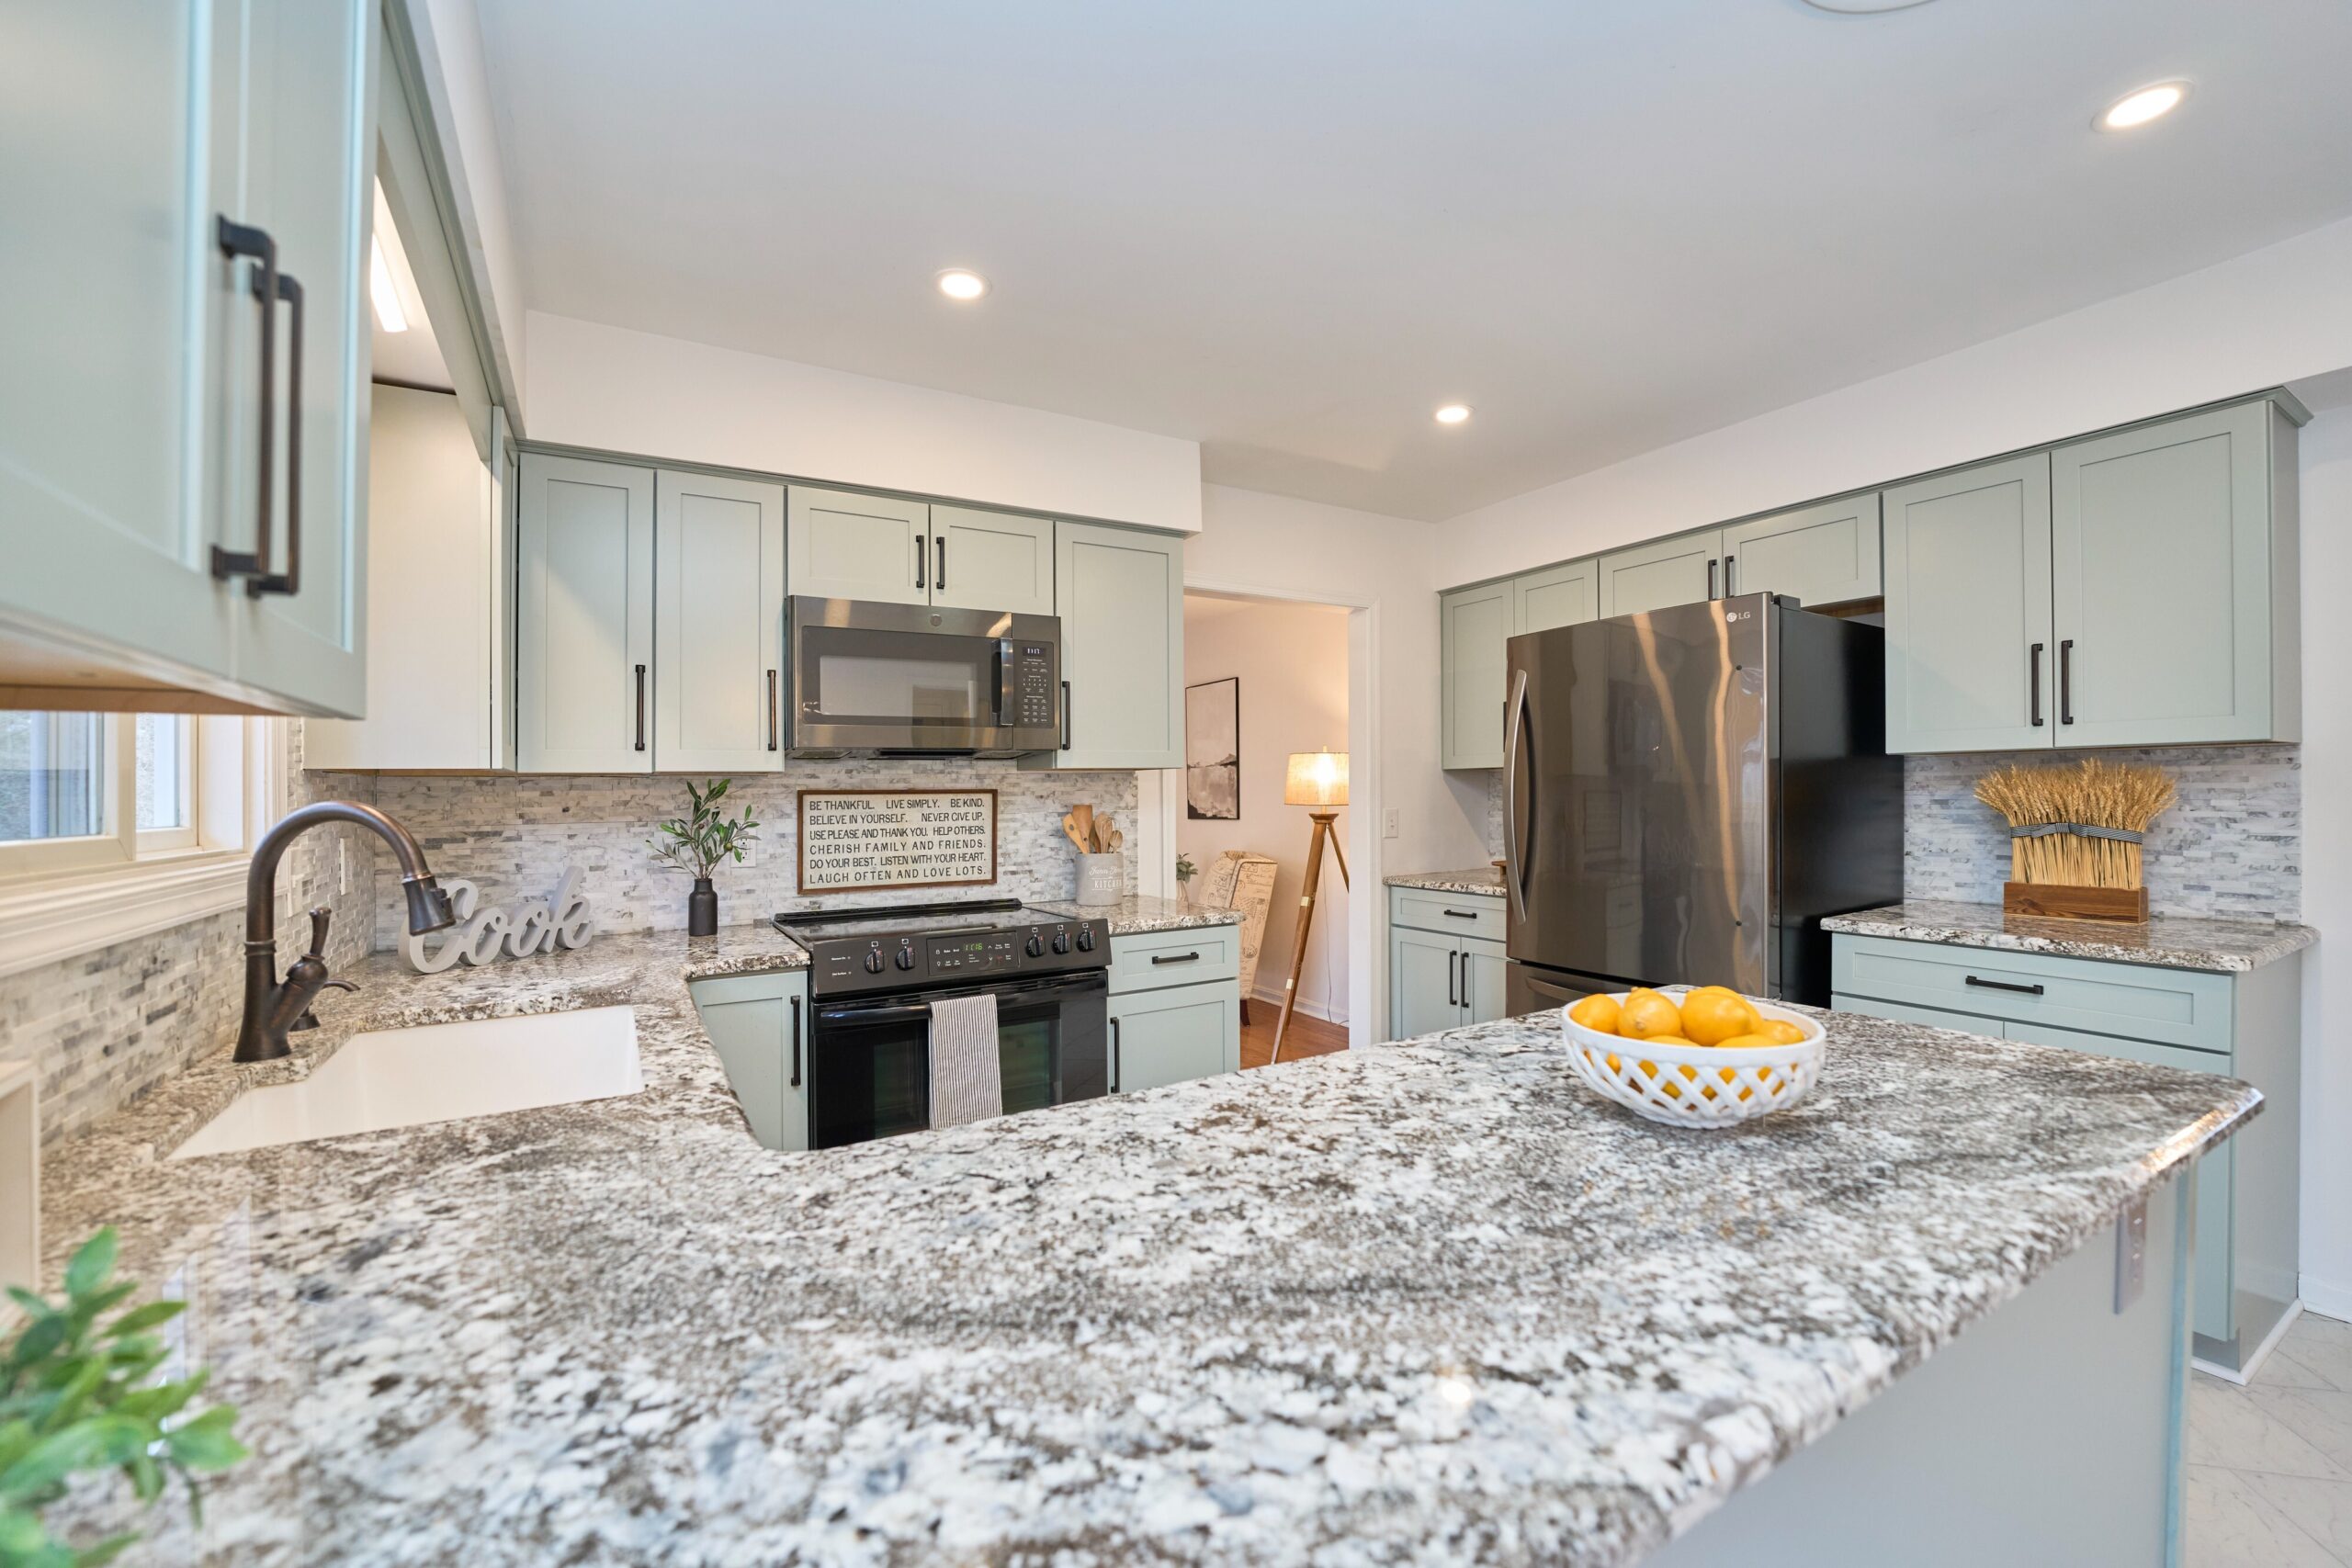 Professional interior photo of 3103 Indian Run Rd - showing the kitchen with unique granite countertops wrapping around, newer grey cabinets with updated hardware, and stainless and black appliances